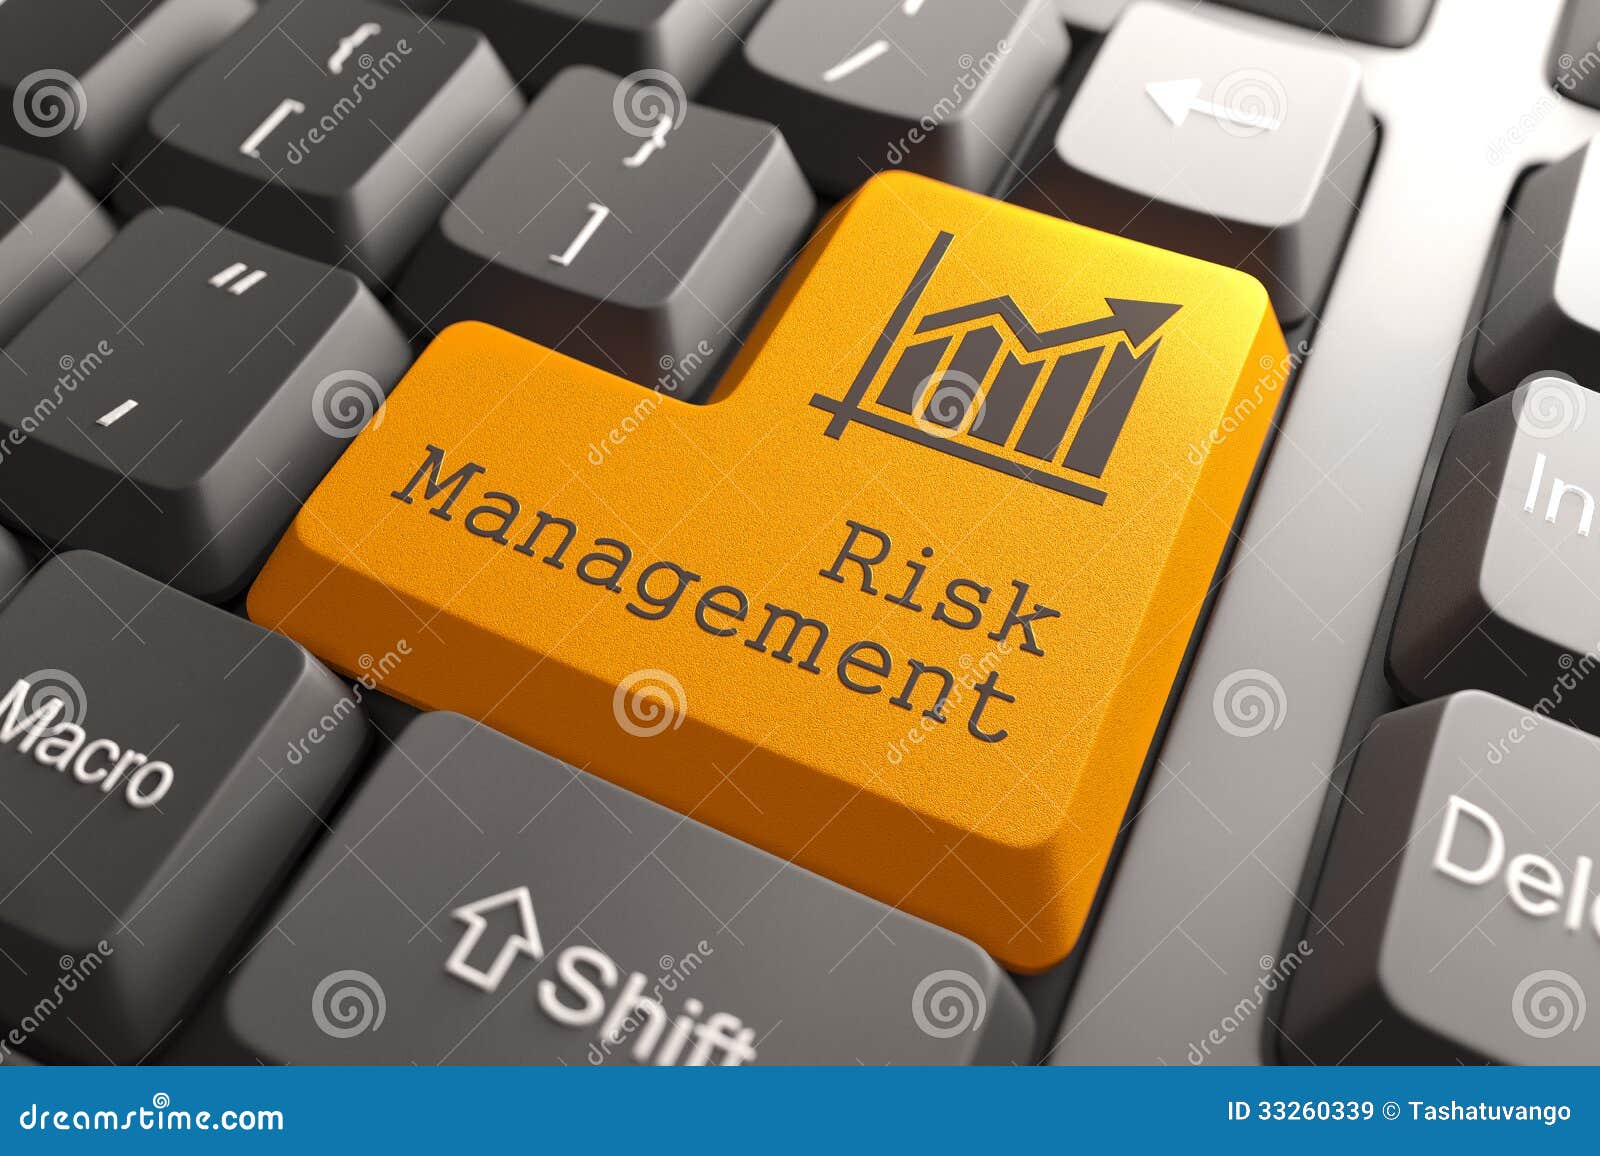 keyboard with risk management button.